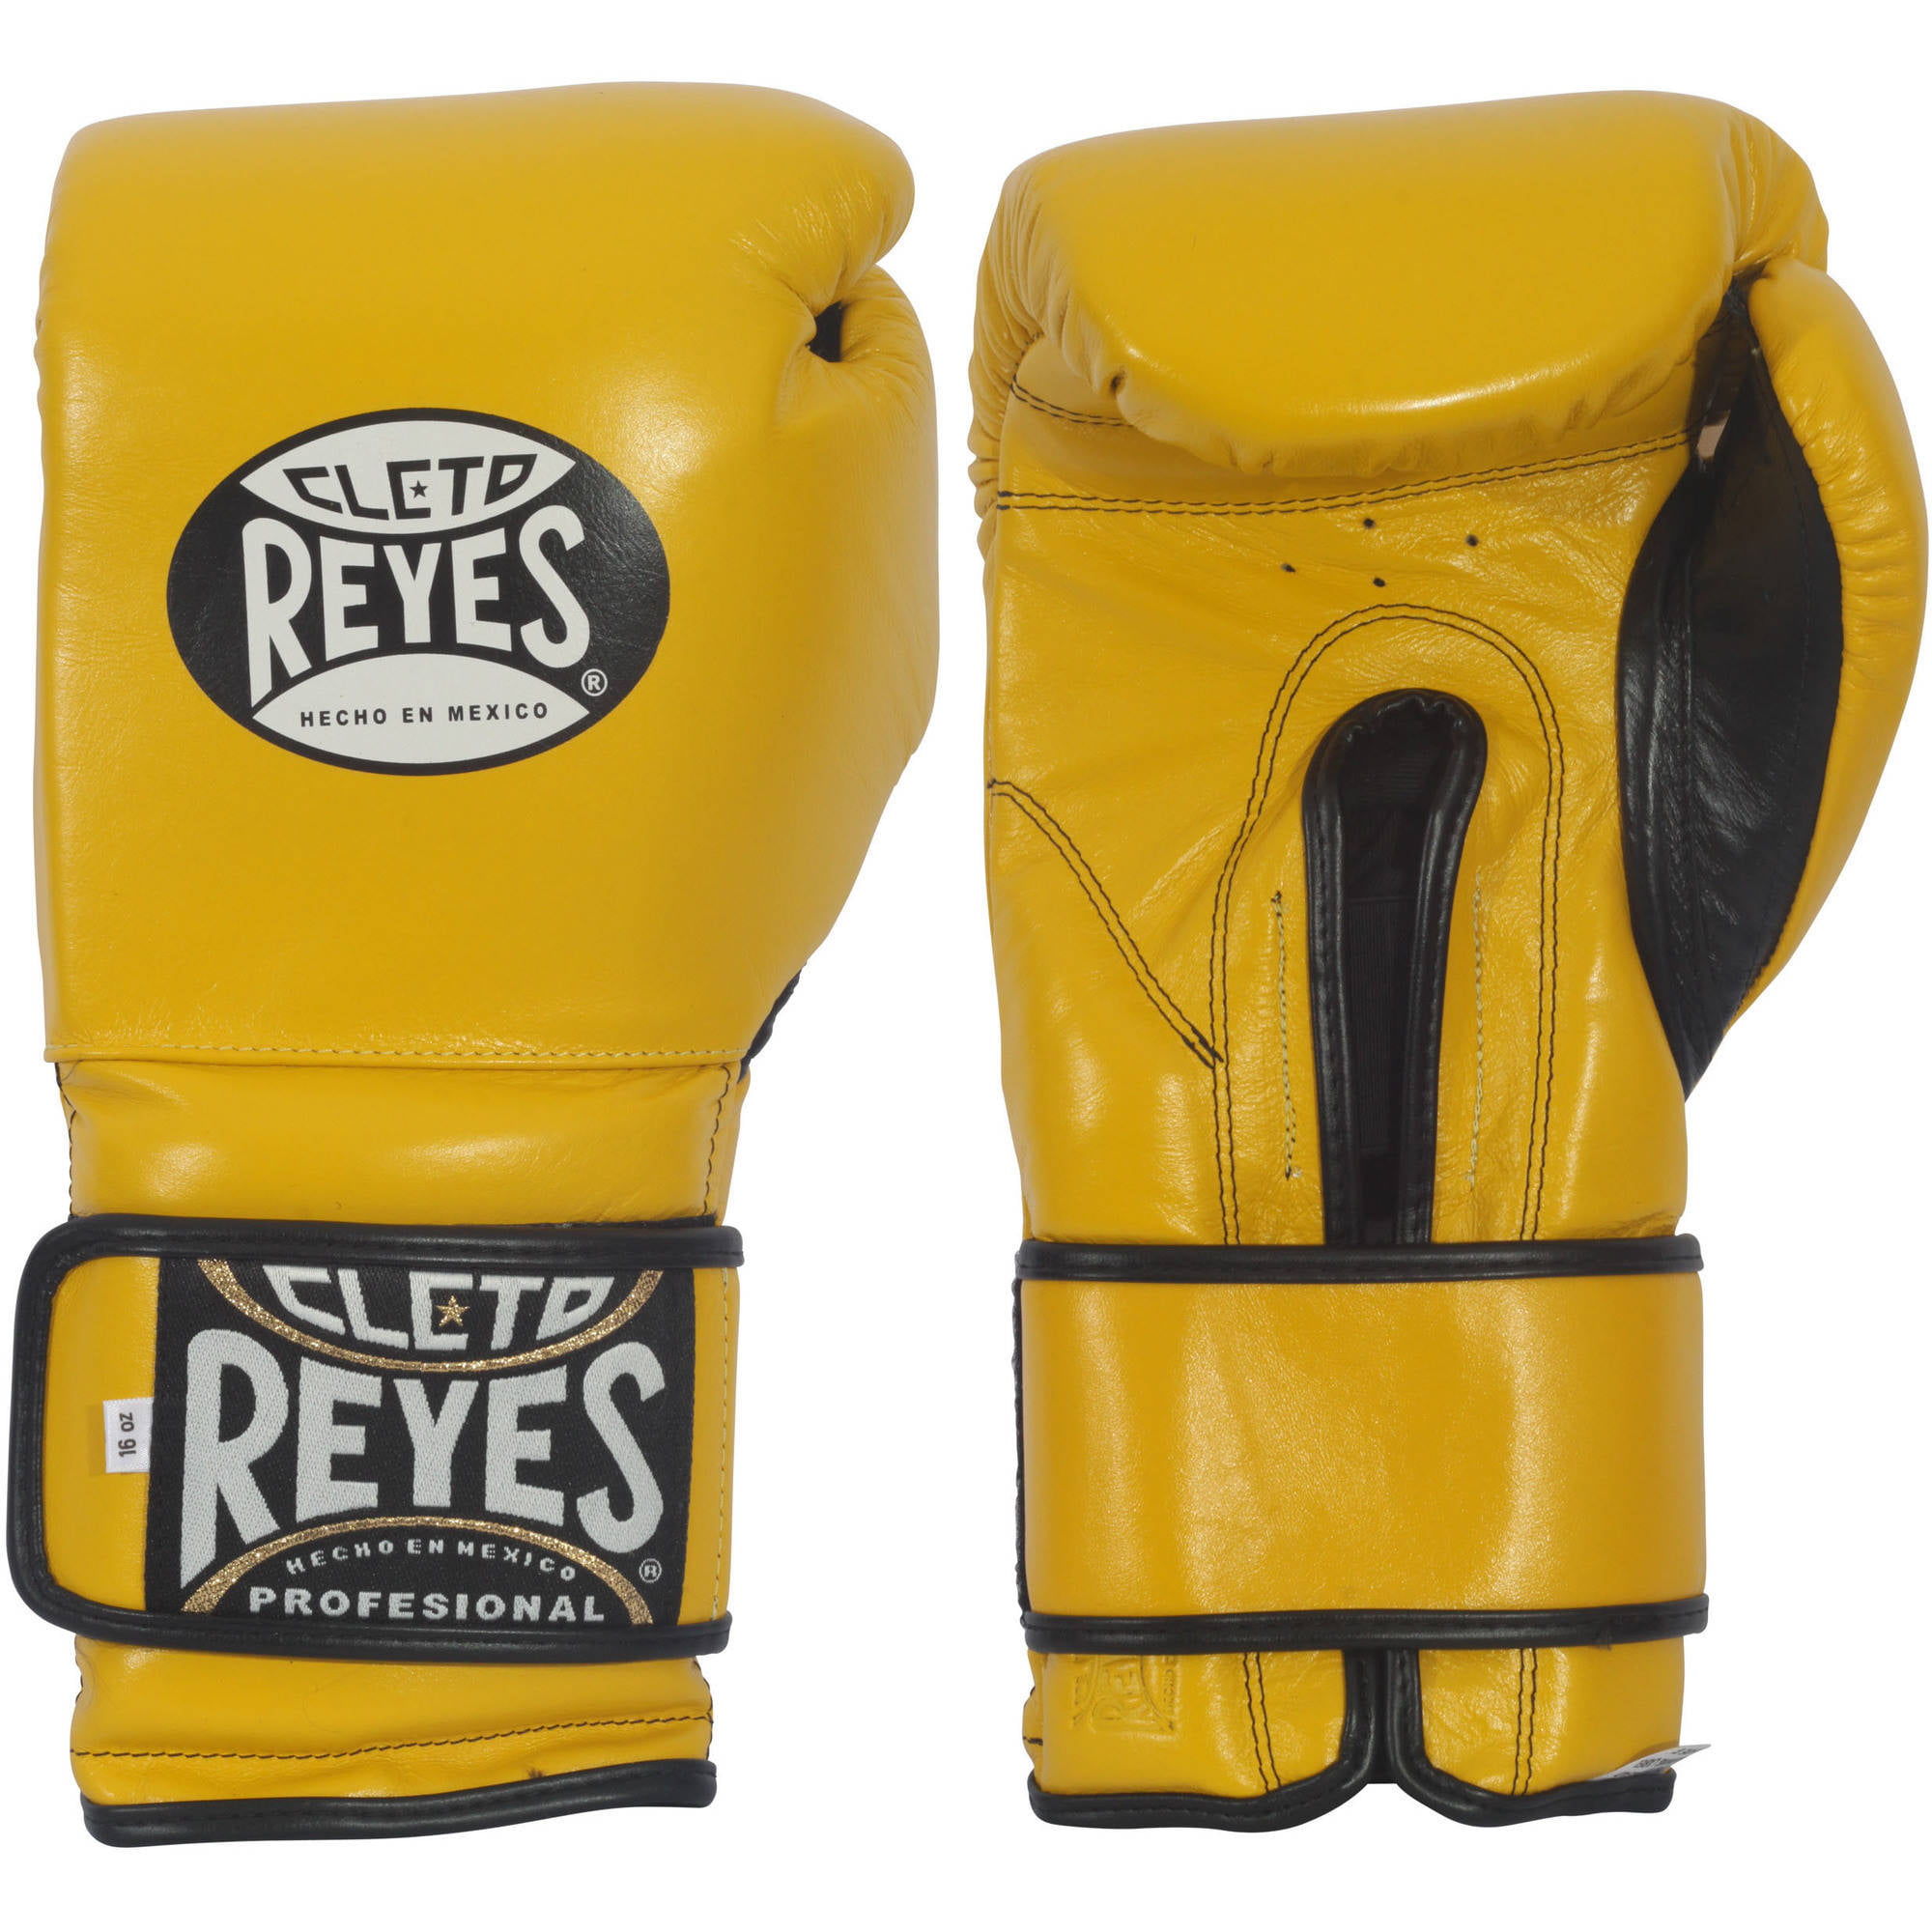 Cleto Reyes Training Gloves Review - Better than the rest?